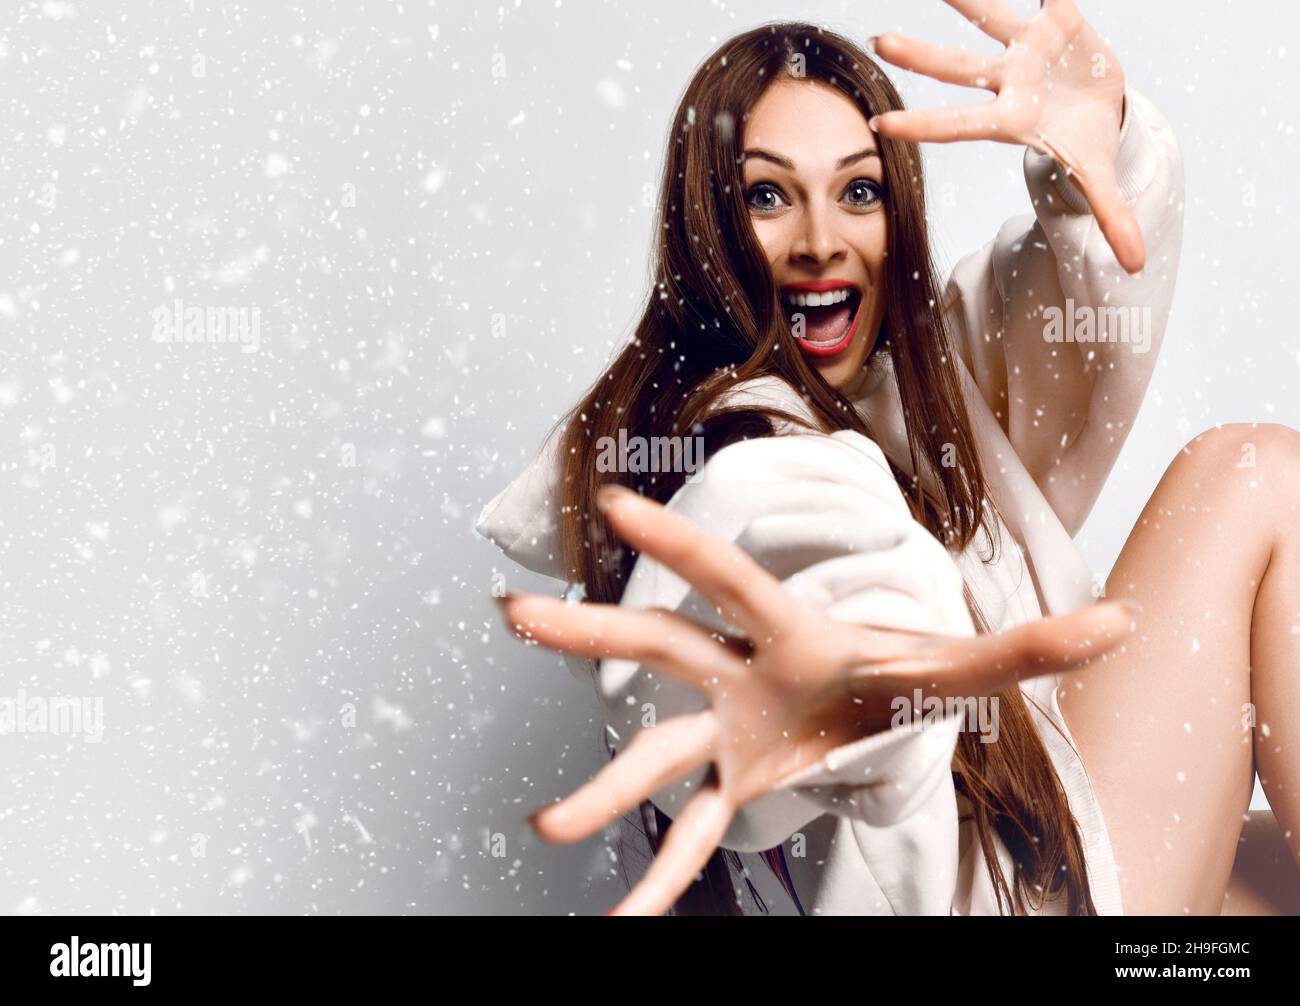 Cheerful excited woman with long hair in hoodie sits gesturing with hands and looking at camera under the snow Stock Photo